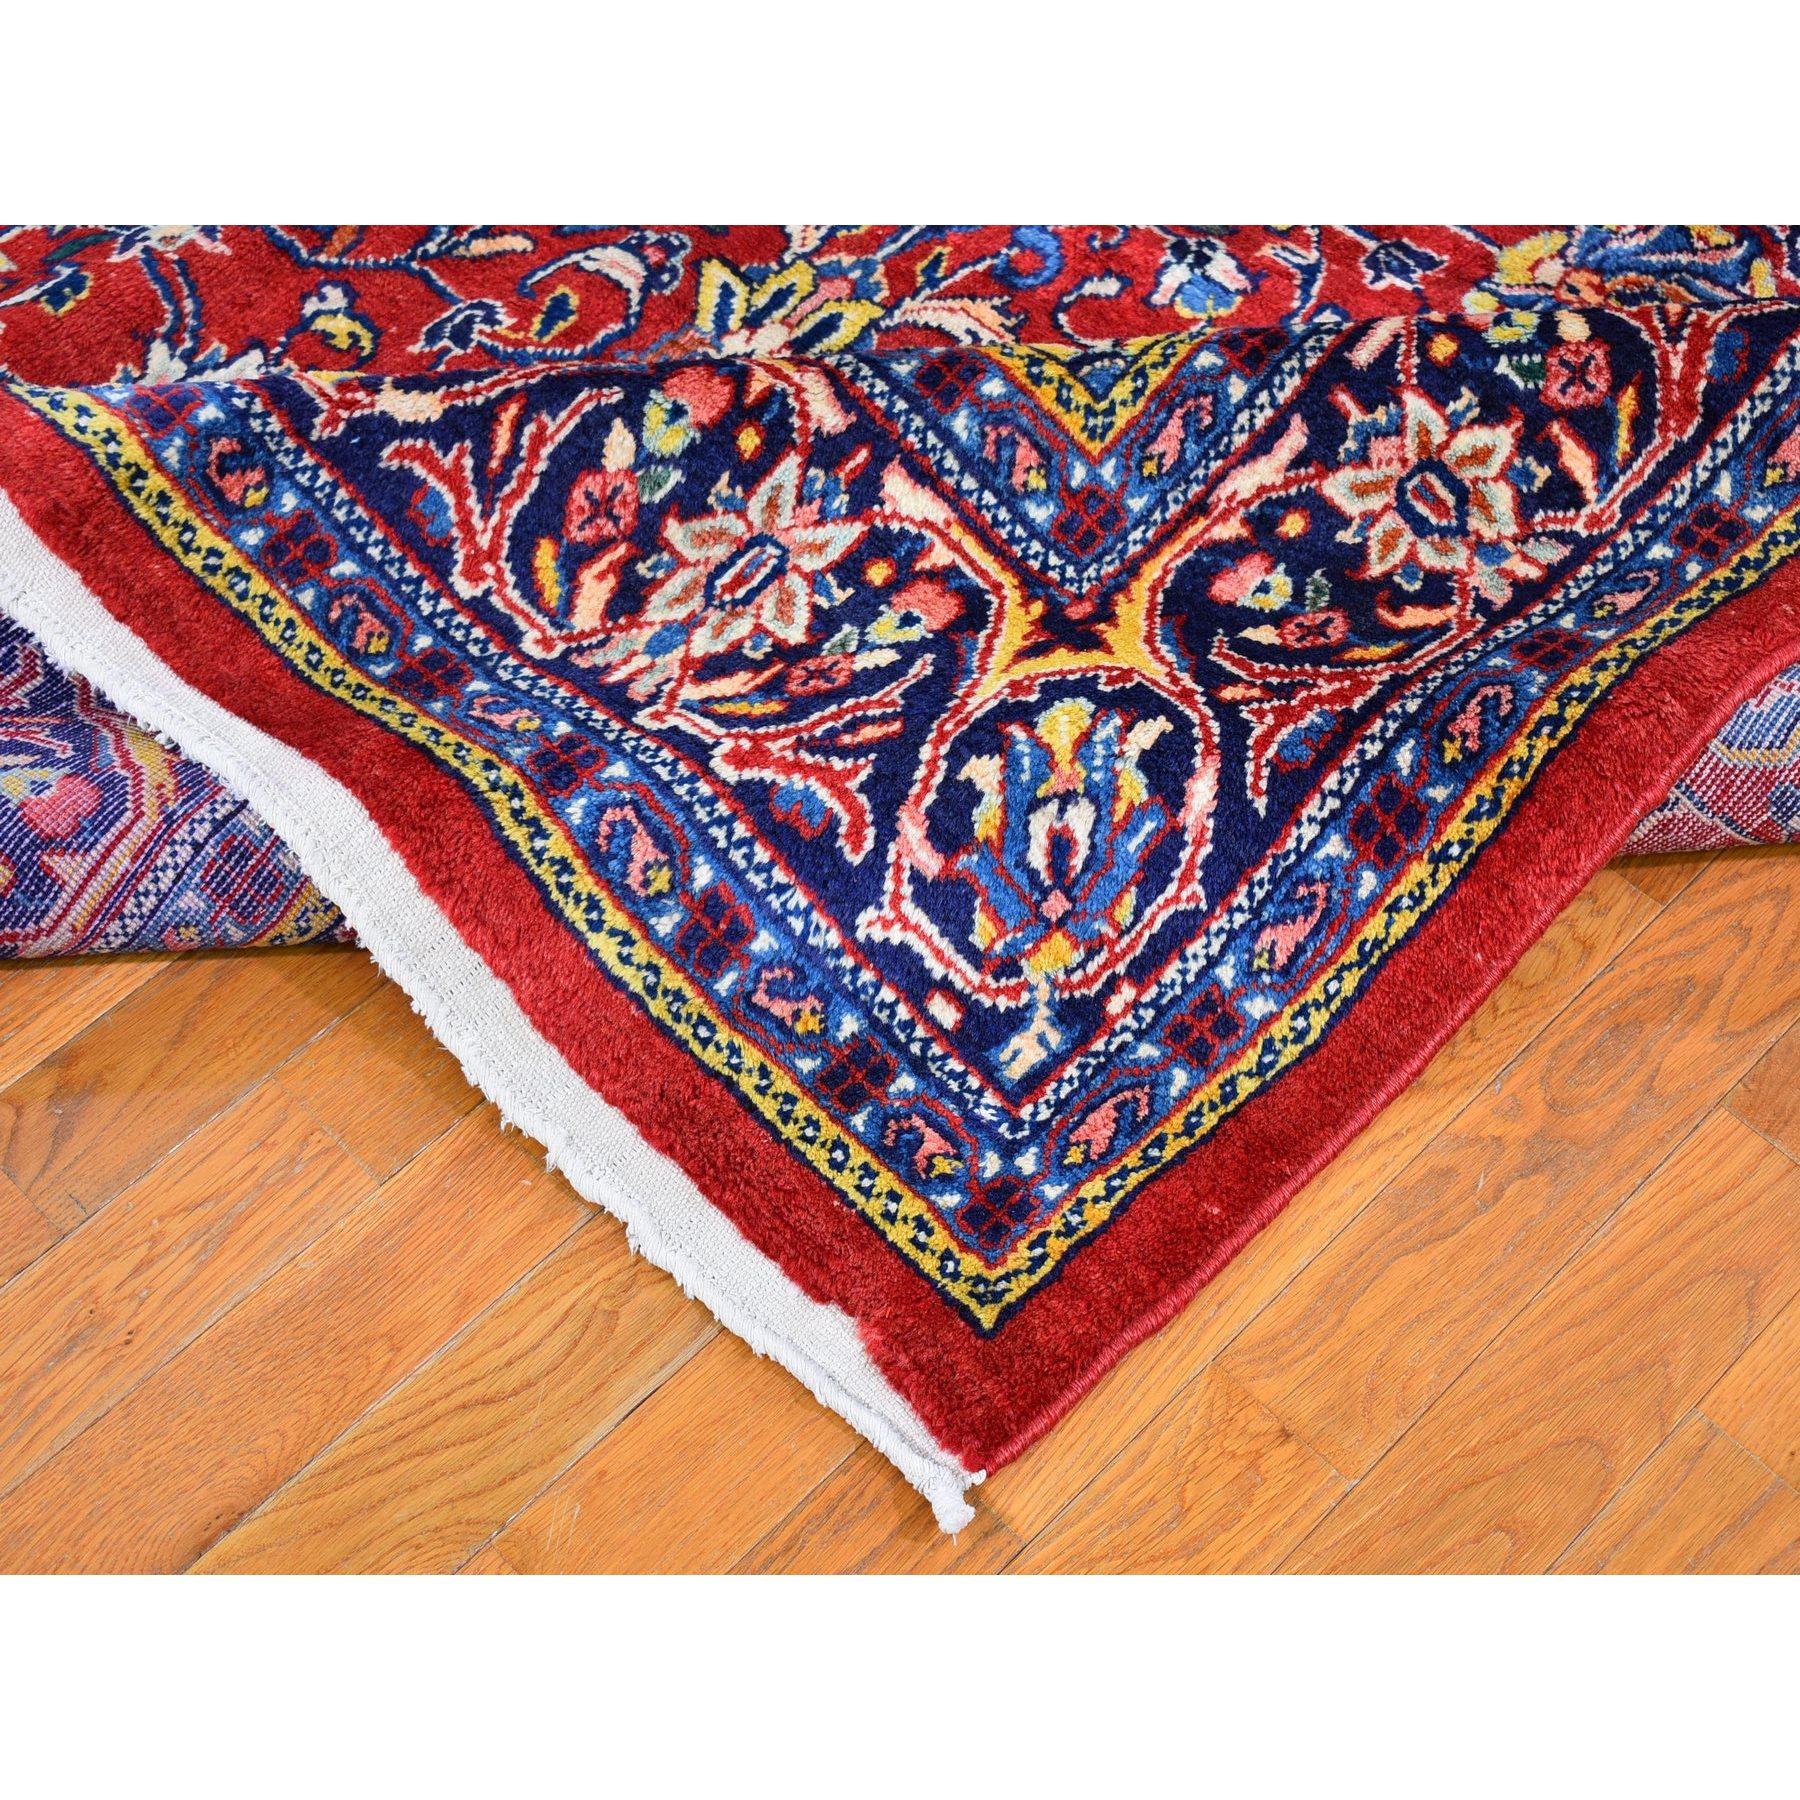 Late 20th Century Long and Narrow Vintage Persian Kashan Thick and Plush Wool Hand Knotted Rug For Sale